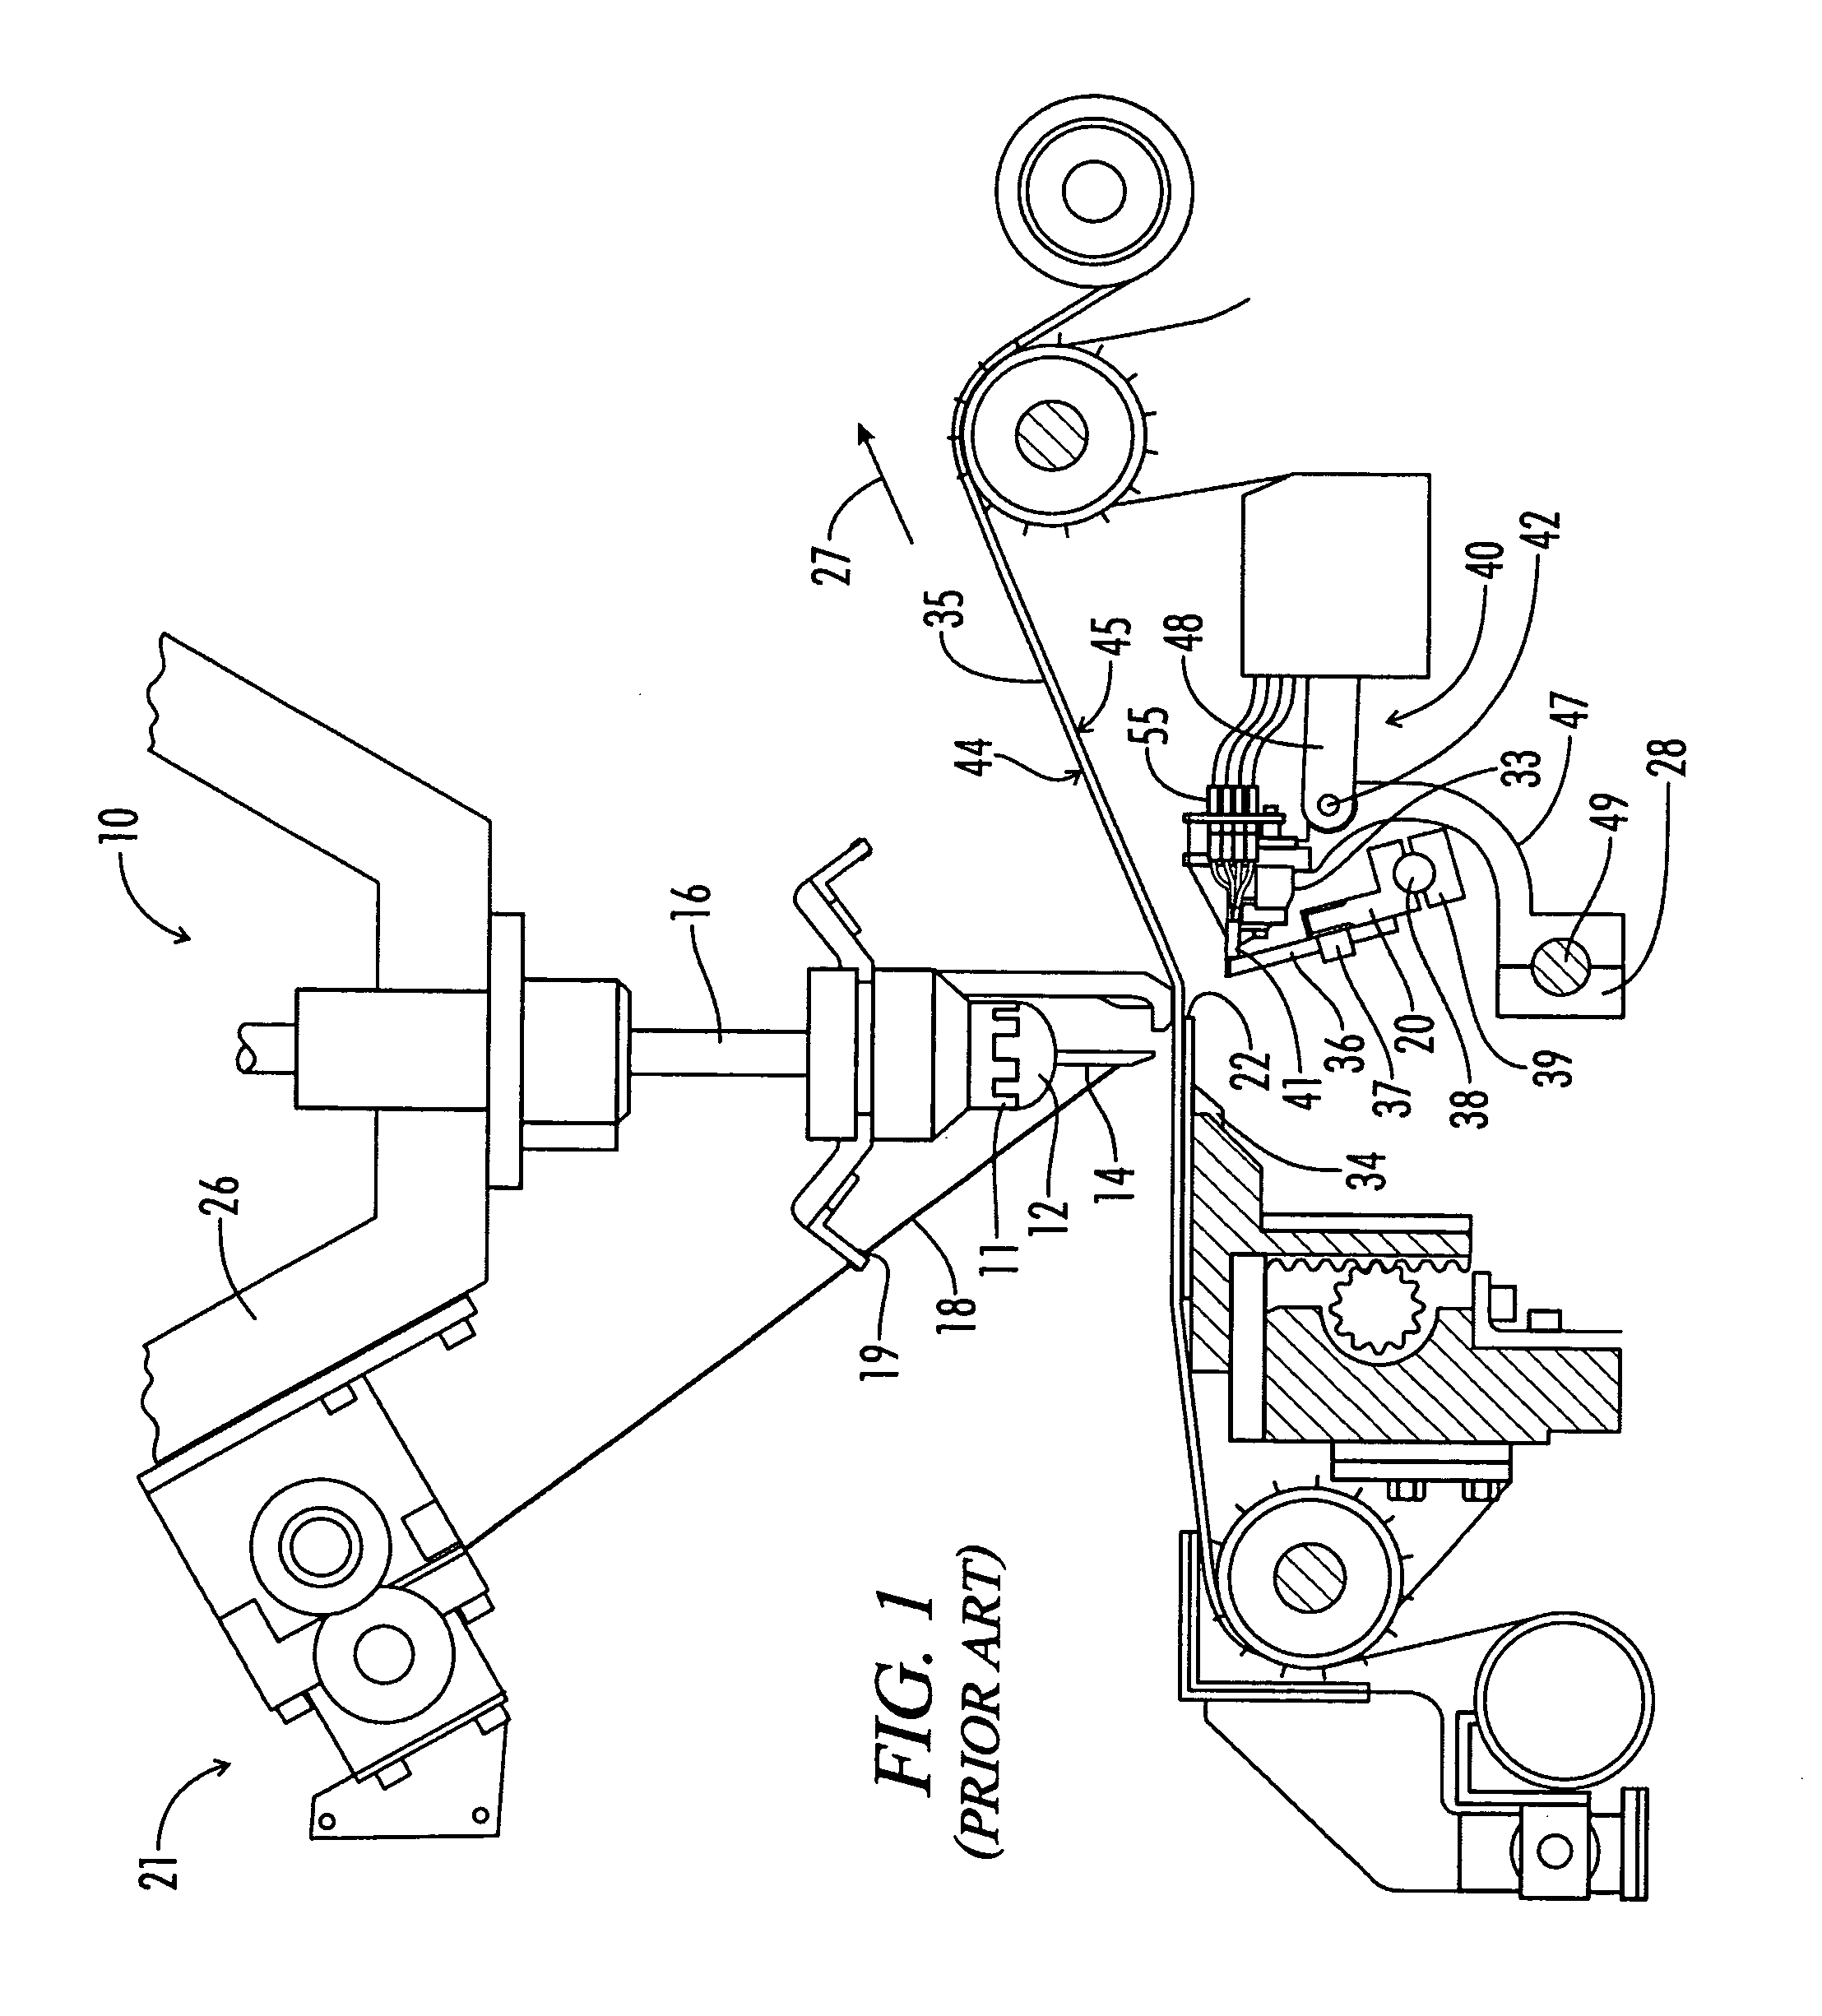 Method for selective display of yarn in a tufted fabric